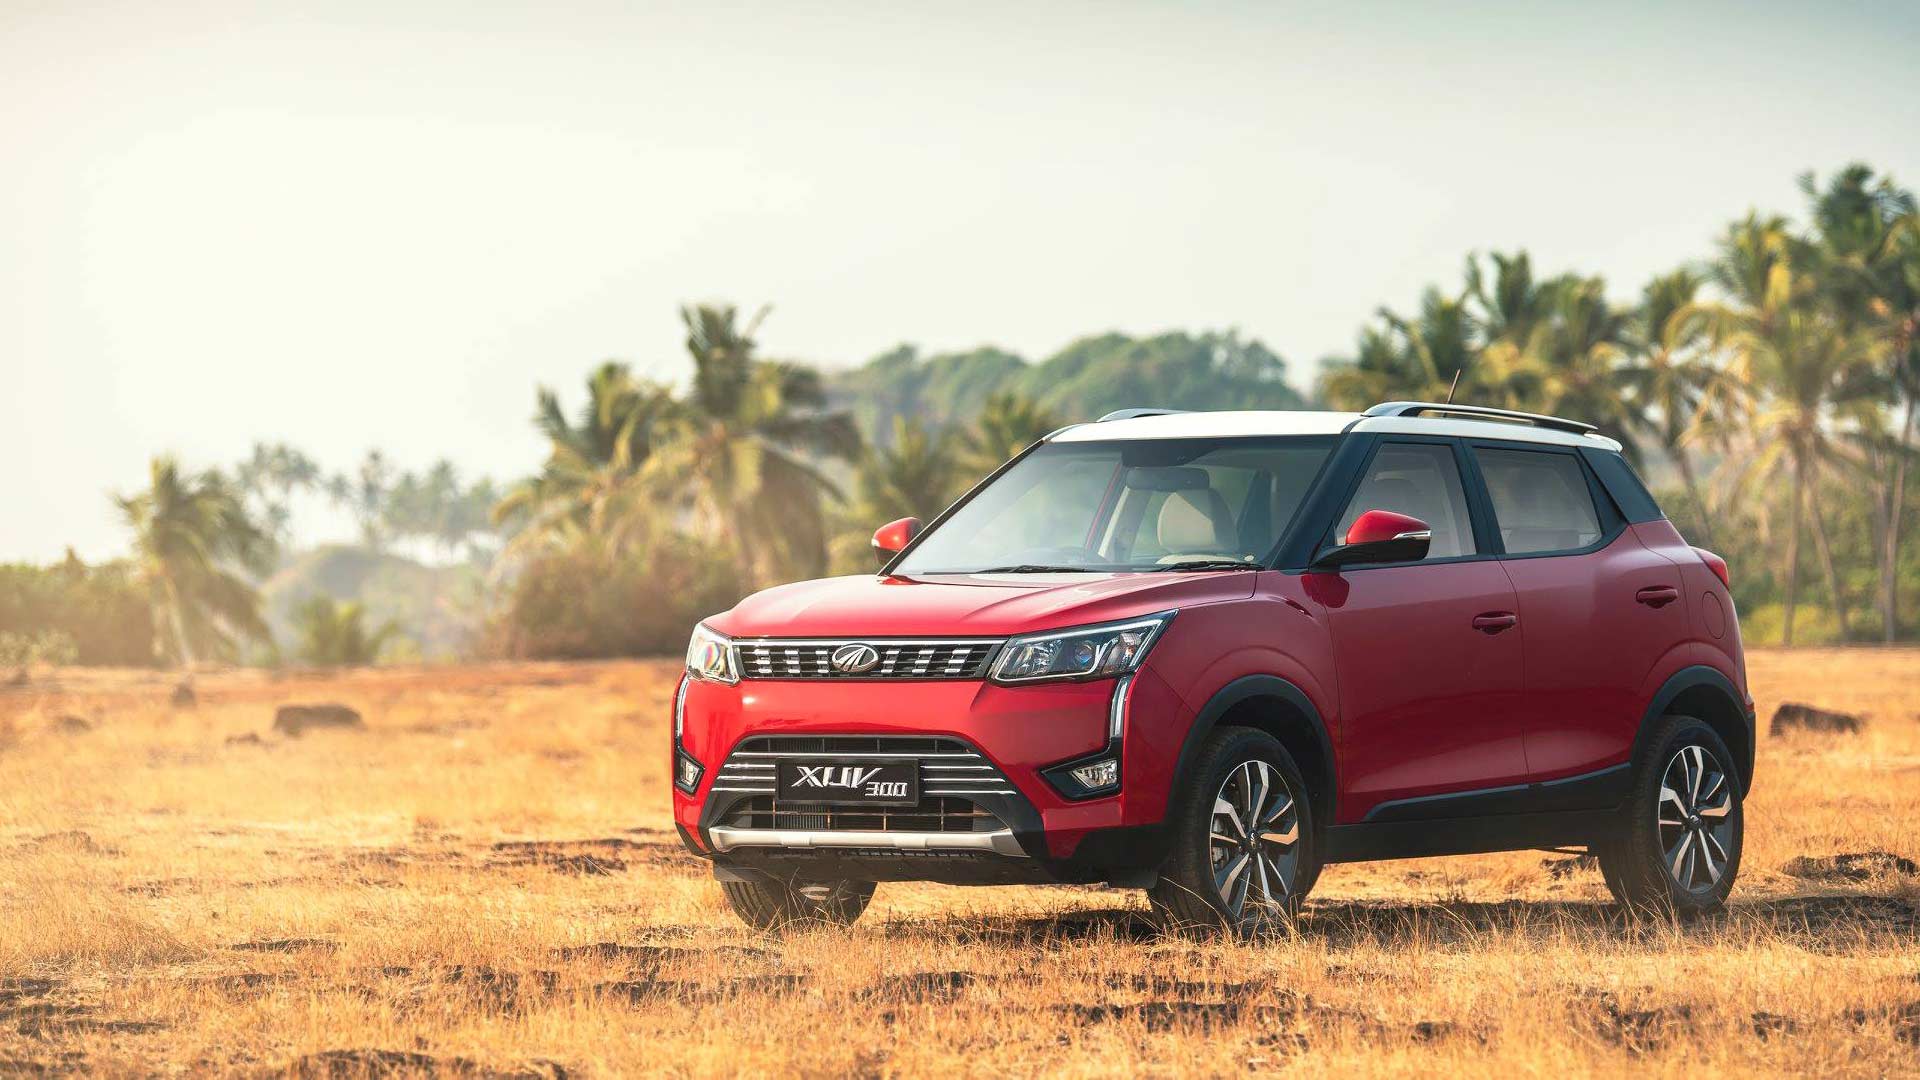 Mahindra Xuv300 Launched At Rs Lakh Autodevot